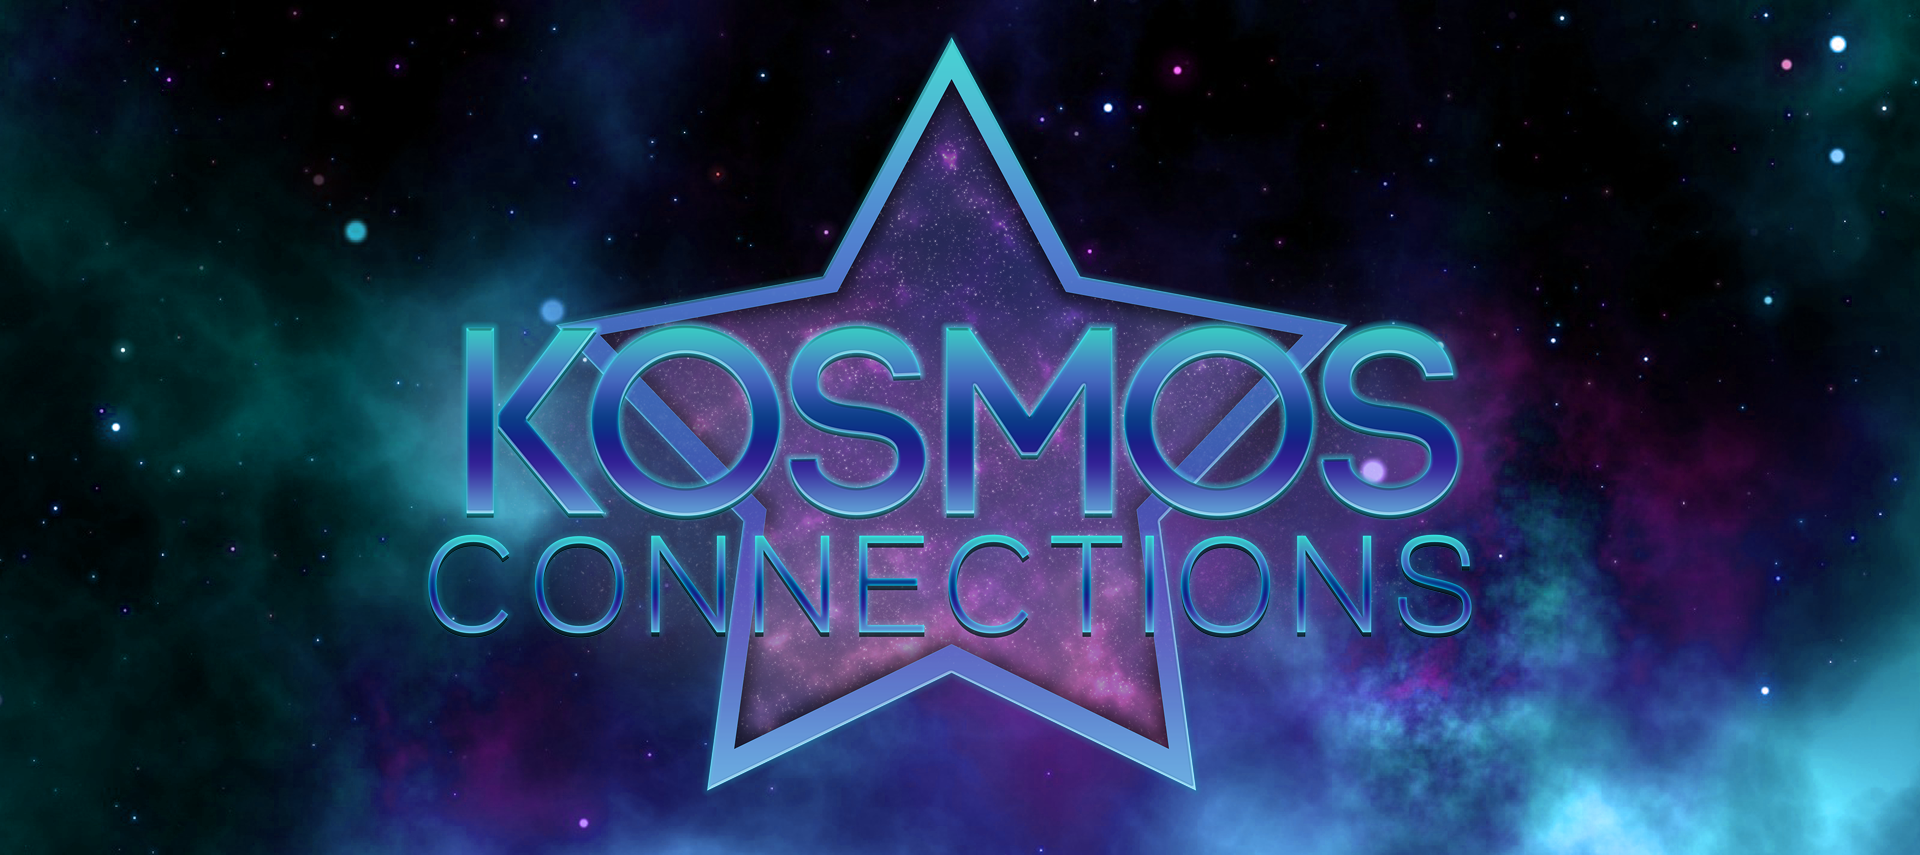 Kosmos Connections Full Game Demo!!!! - Kosmos Connections by ThetauGames